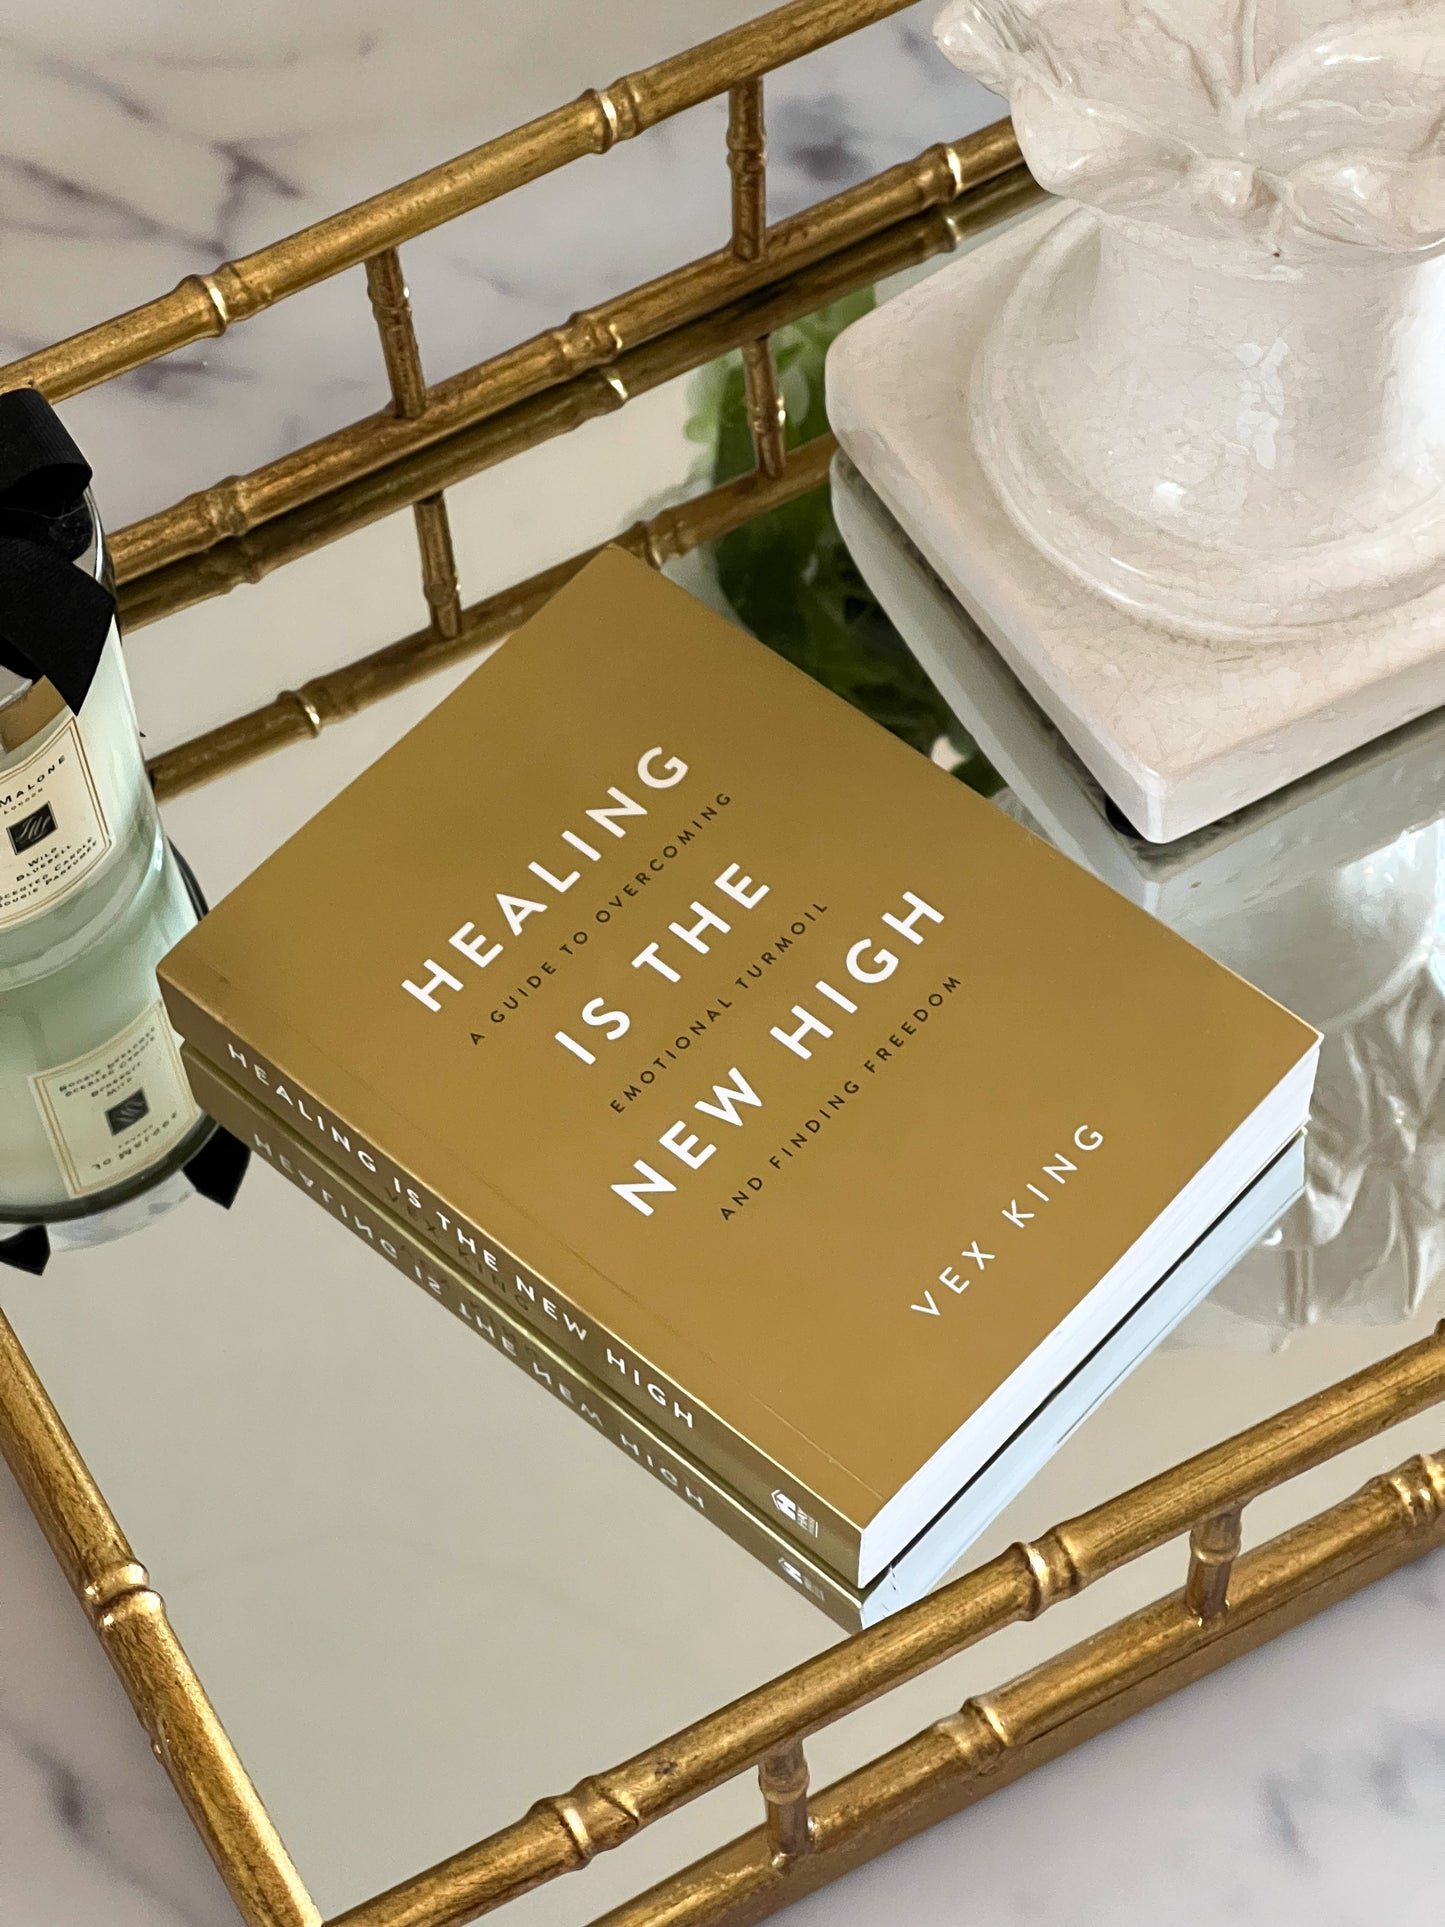 Healing Is The New High Coffee Table Book